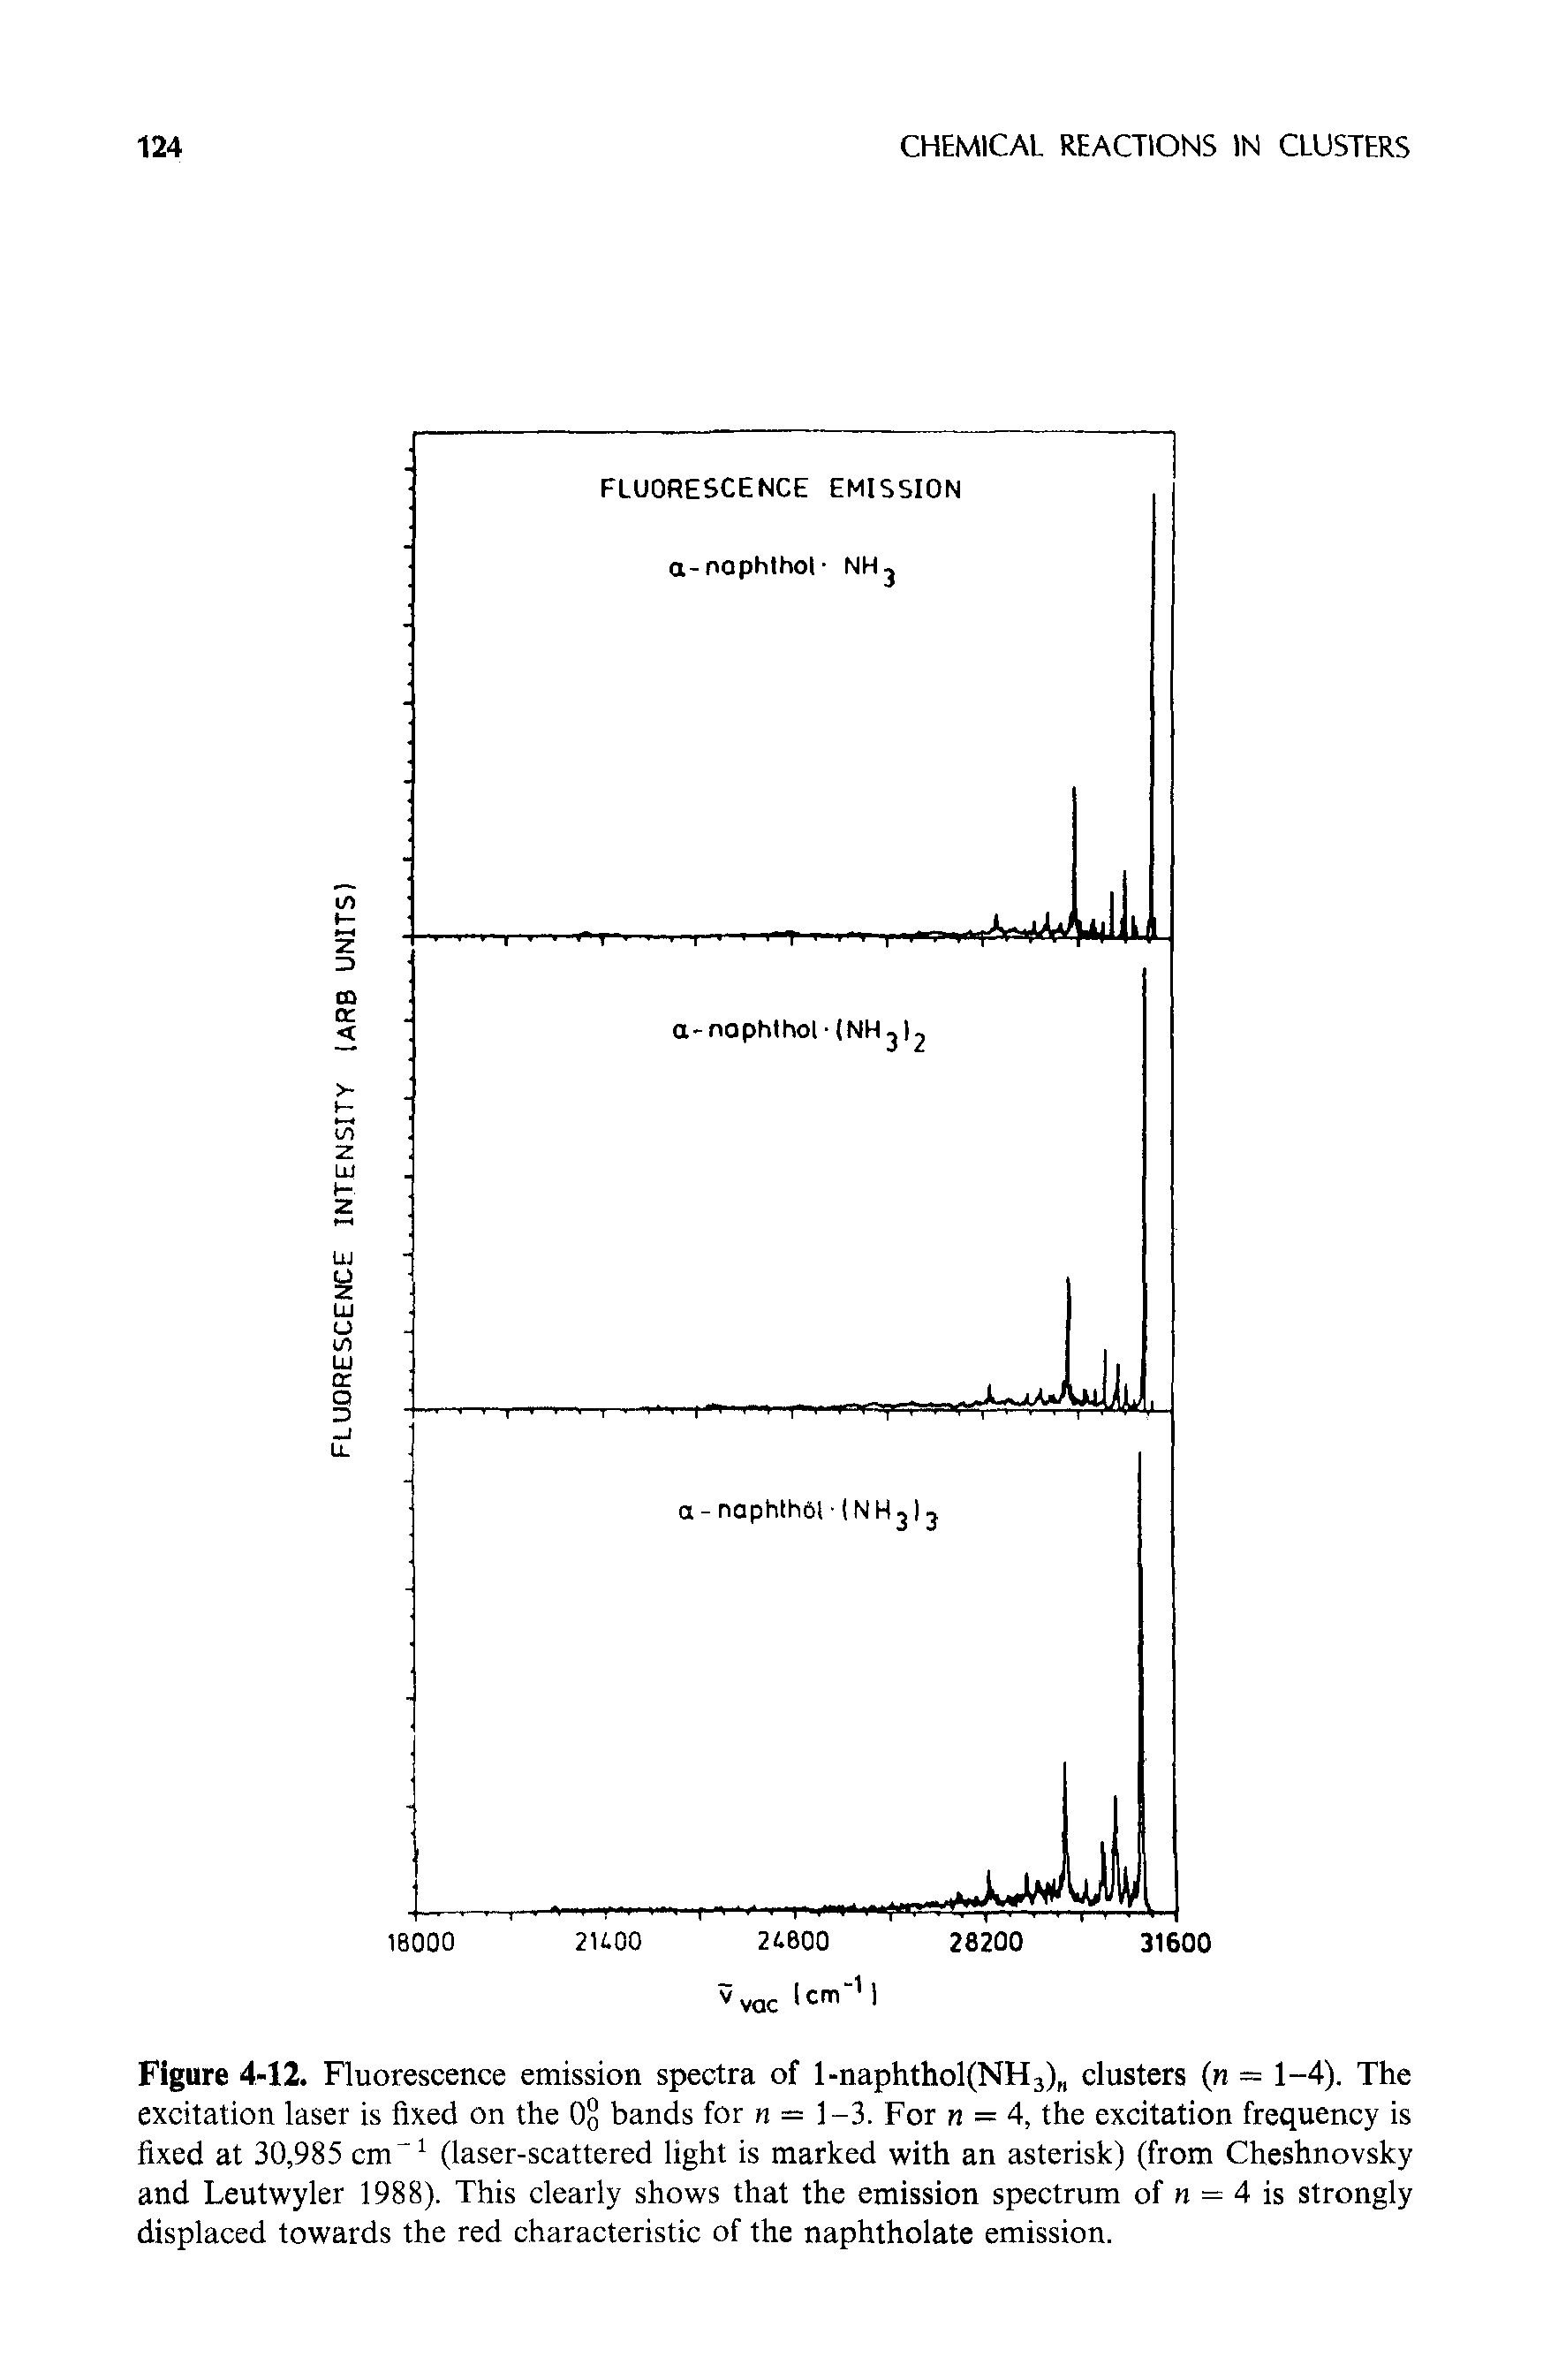 Figure 4-12. Fluorescence emission spectra of l-naphthol(NH3) clusters (n — 1-4). The excitation laser is fixed on the 0° bands for n = 1-3. For n = 4, the excitation frequency is fixed at 30,985 cm 1 (laser-scattered light is marked with an asterisk) (from Cheshnovsky and Leutwyler 1988). This clearly shows that the emission spectrum of n = 4 is strongly displaced towards the red characteristic of the naphtholate emission.